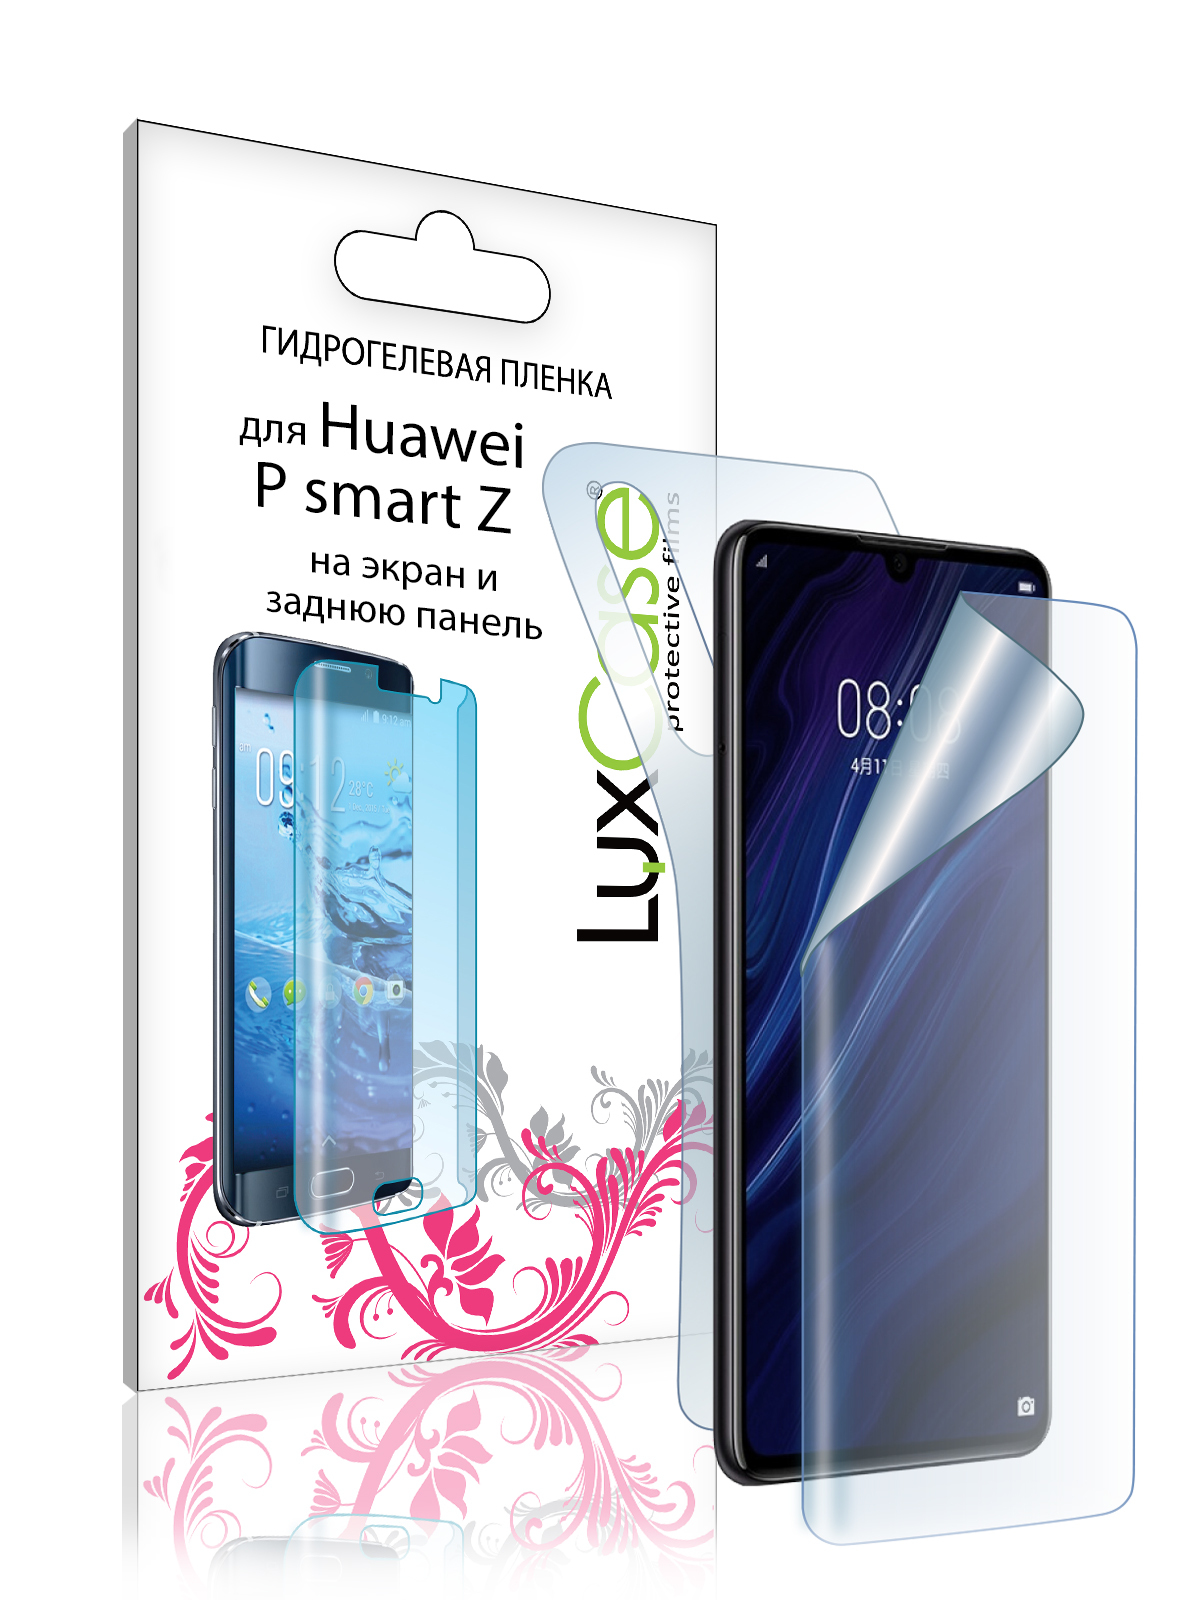 Пленка гидрогелевая LuxCase для Huawei P Smart Z 0.14mm Front and Back Transperent 86708 гидрогелевая пленка luxcase для oppo reno 5 lite 0 14mm front and back transperent 86690